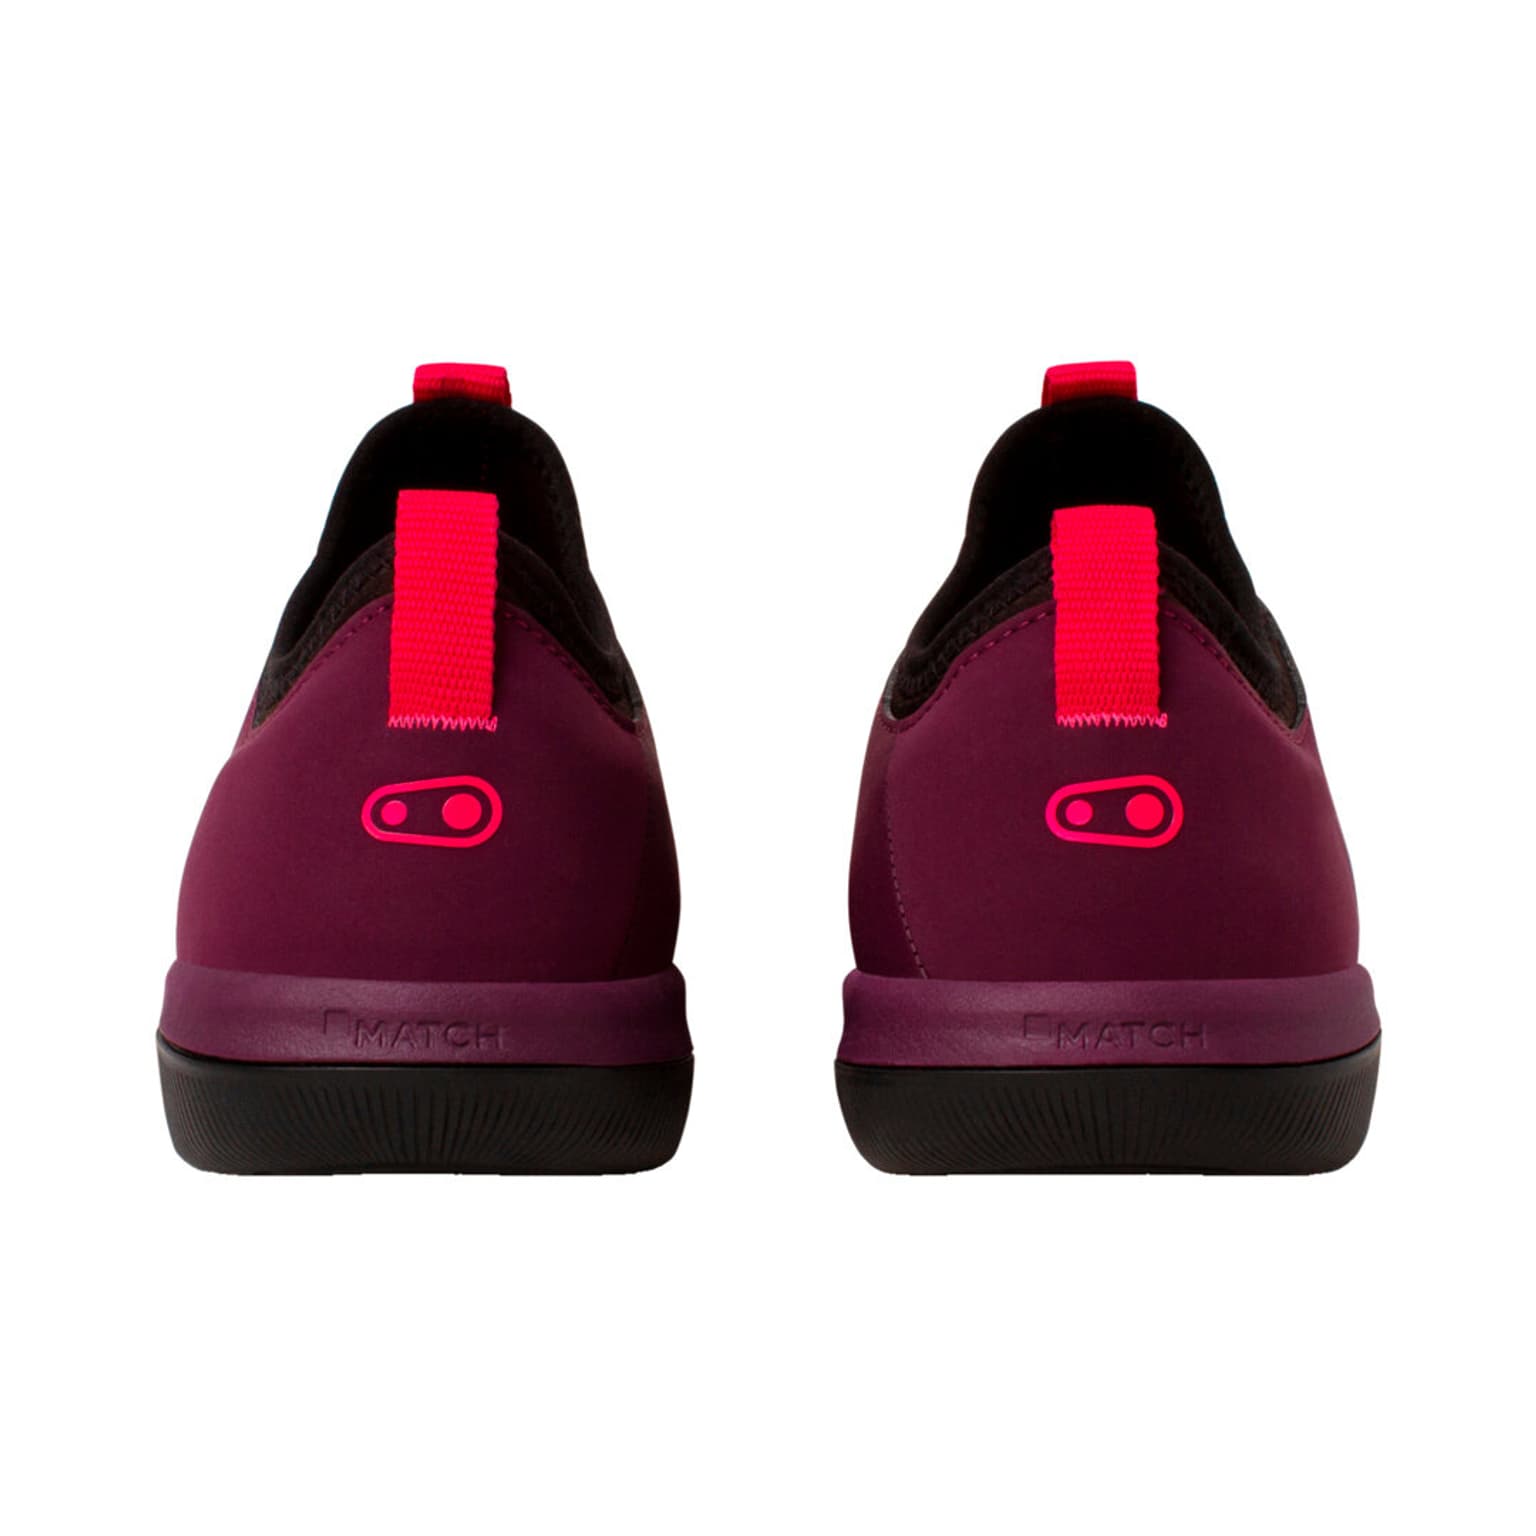 crankbrothers Stamp Street Lace Chaussures de cyclisme aubergine 3